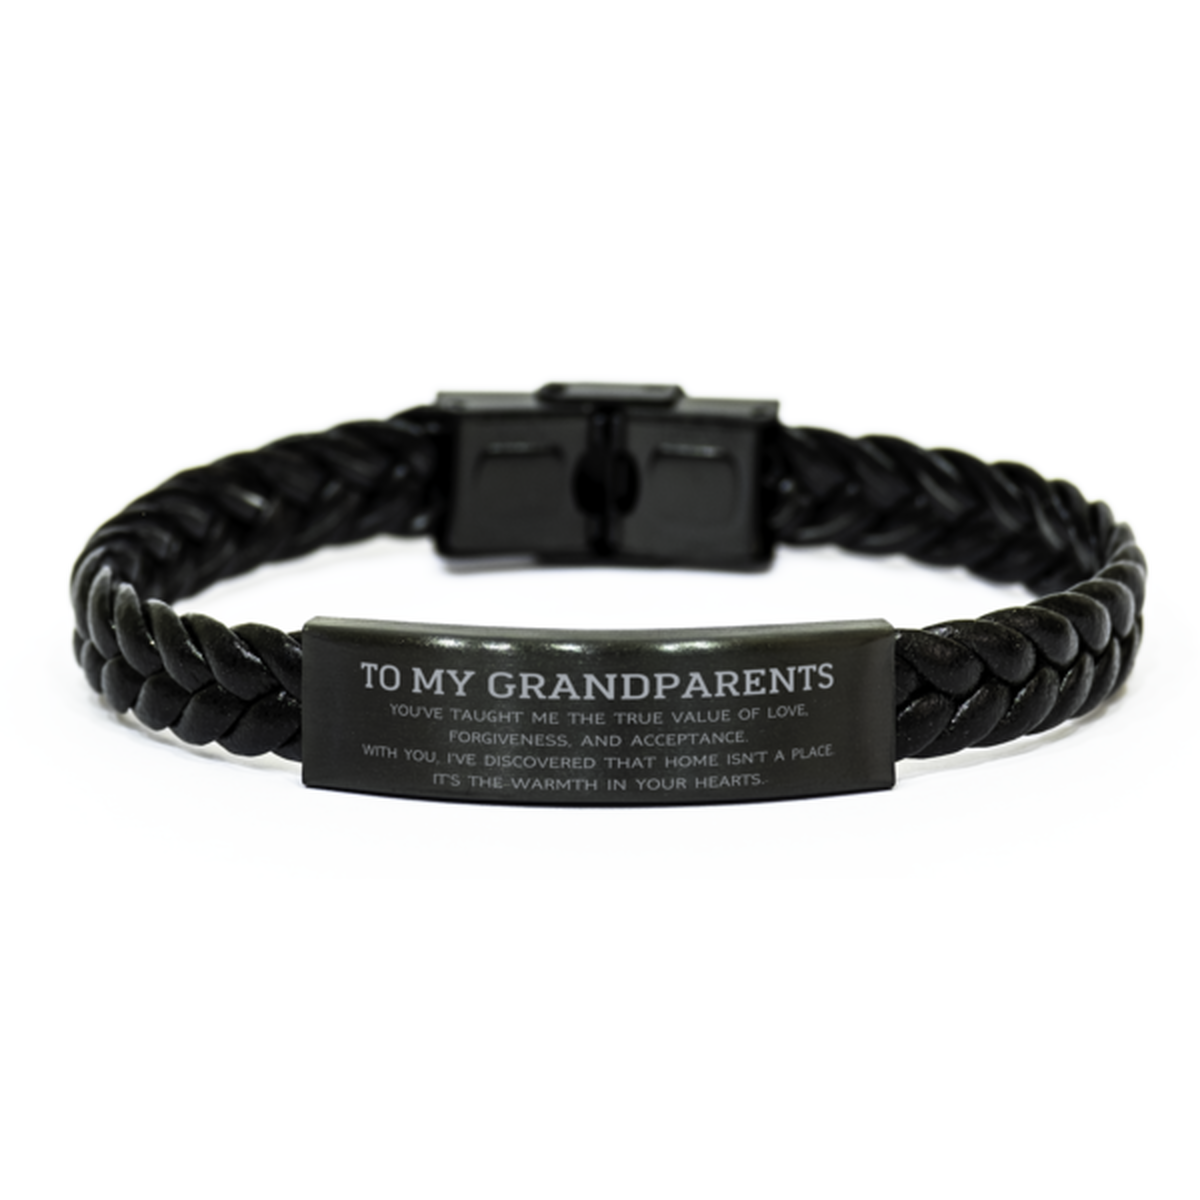 To My Grandparents Gifts, You've taught me the true value of love, Thank You Gifts For Grandparents, Birthday Braided Leather Bracelet For Grandparents